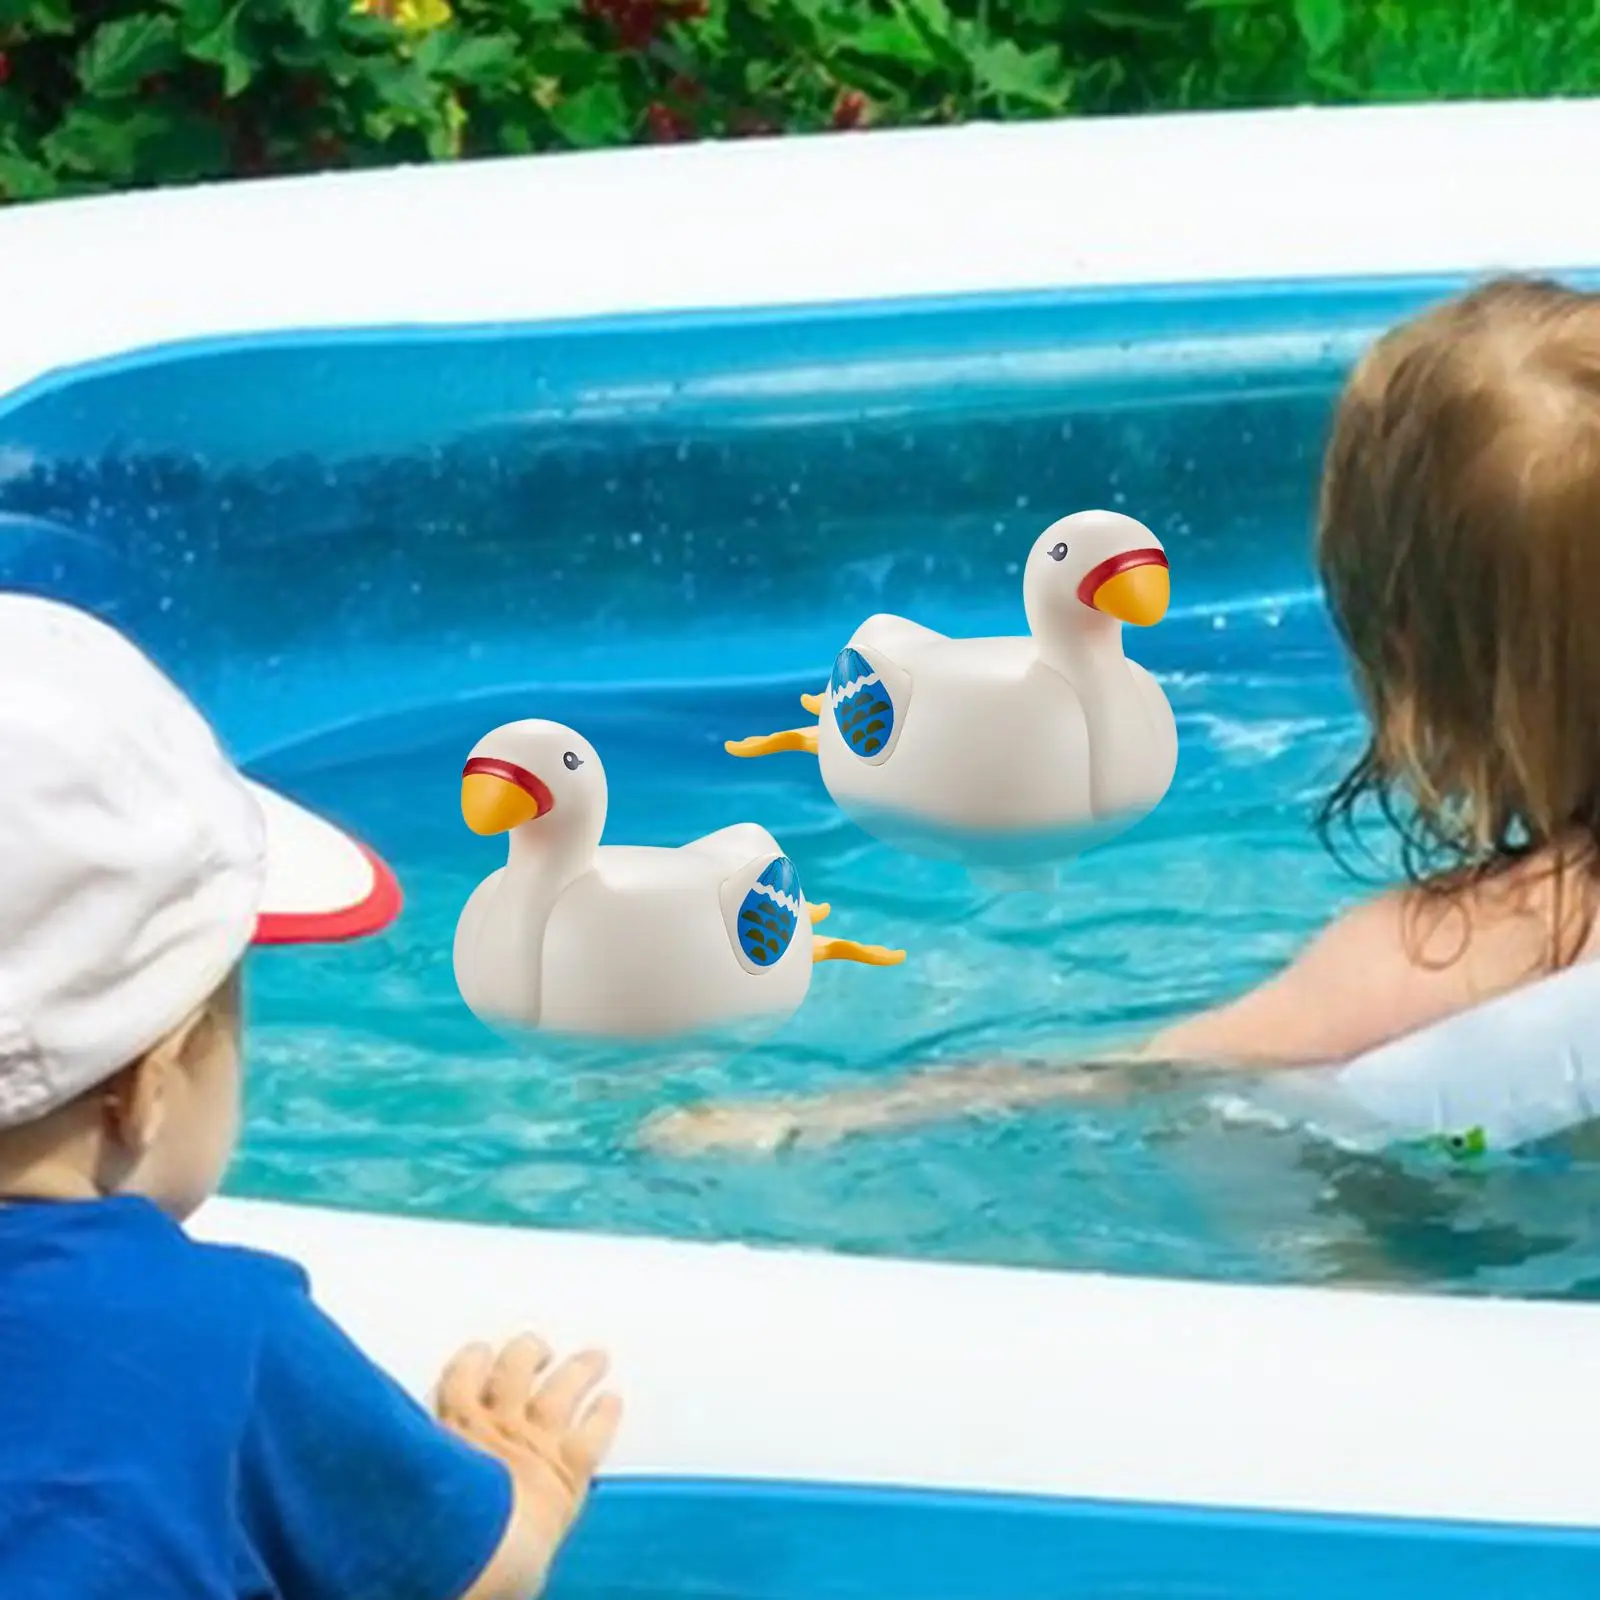 Fun Swan Bath Toys pool Time Outdoor Activities Toy Water Spraying bath Animal Bath Toy for Swimming